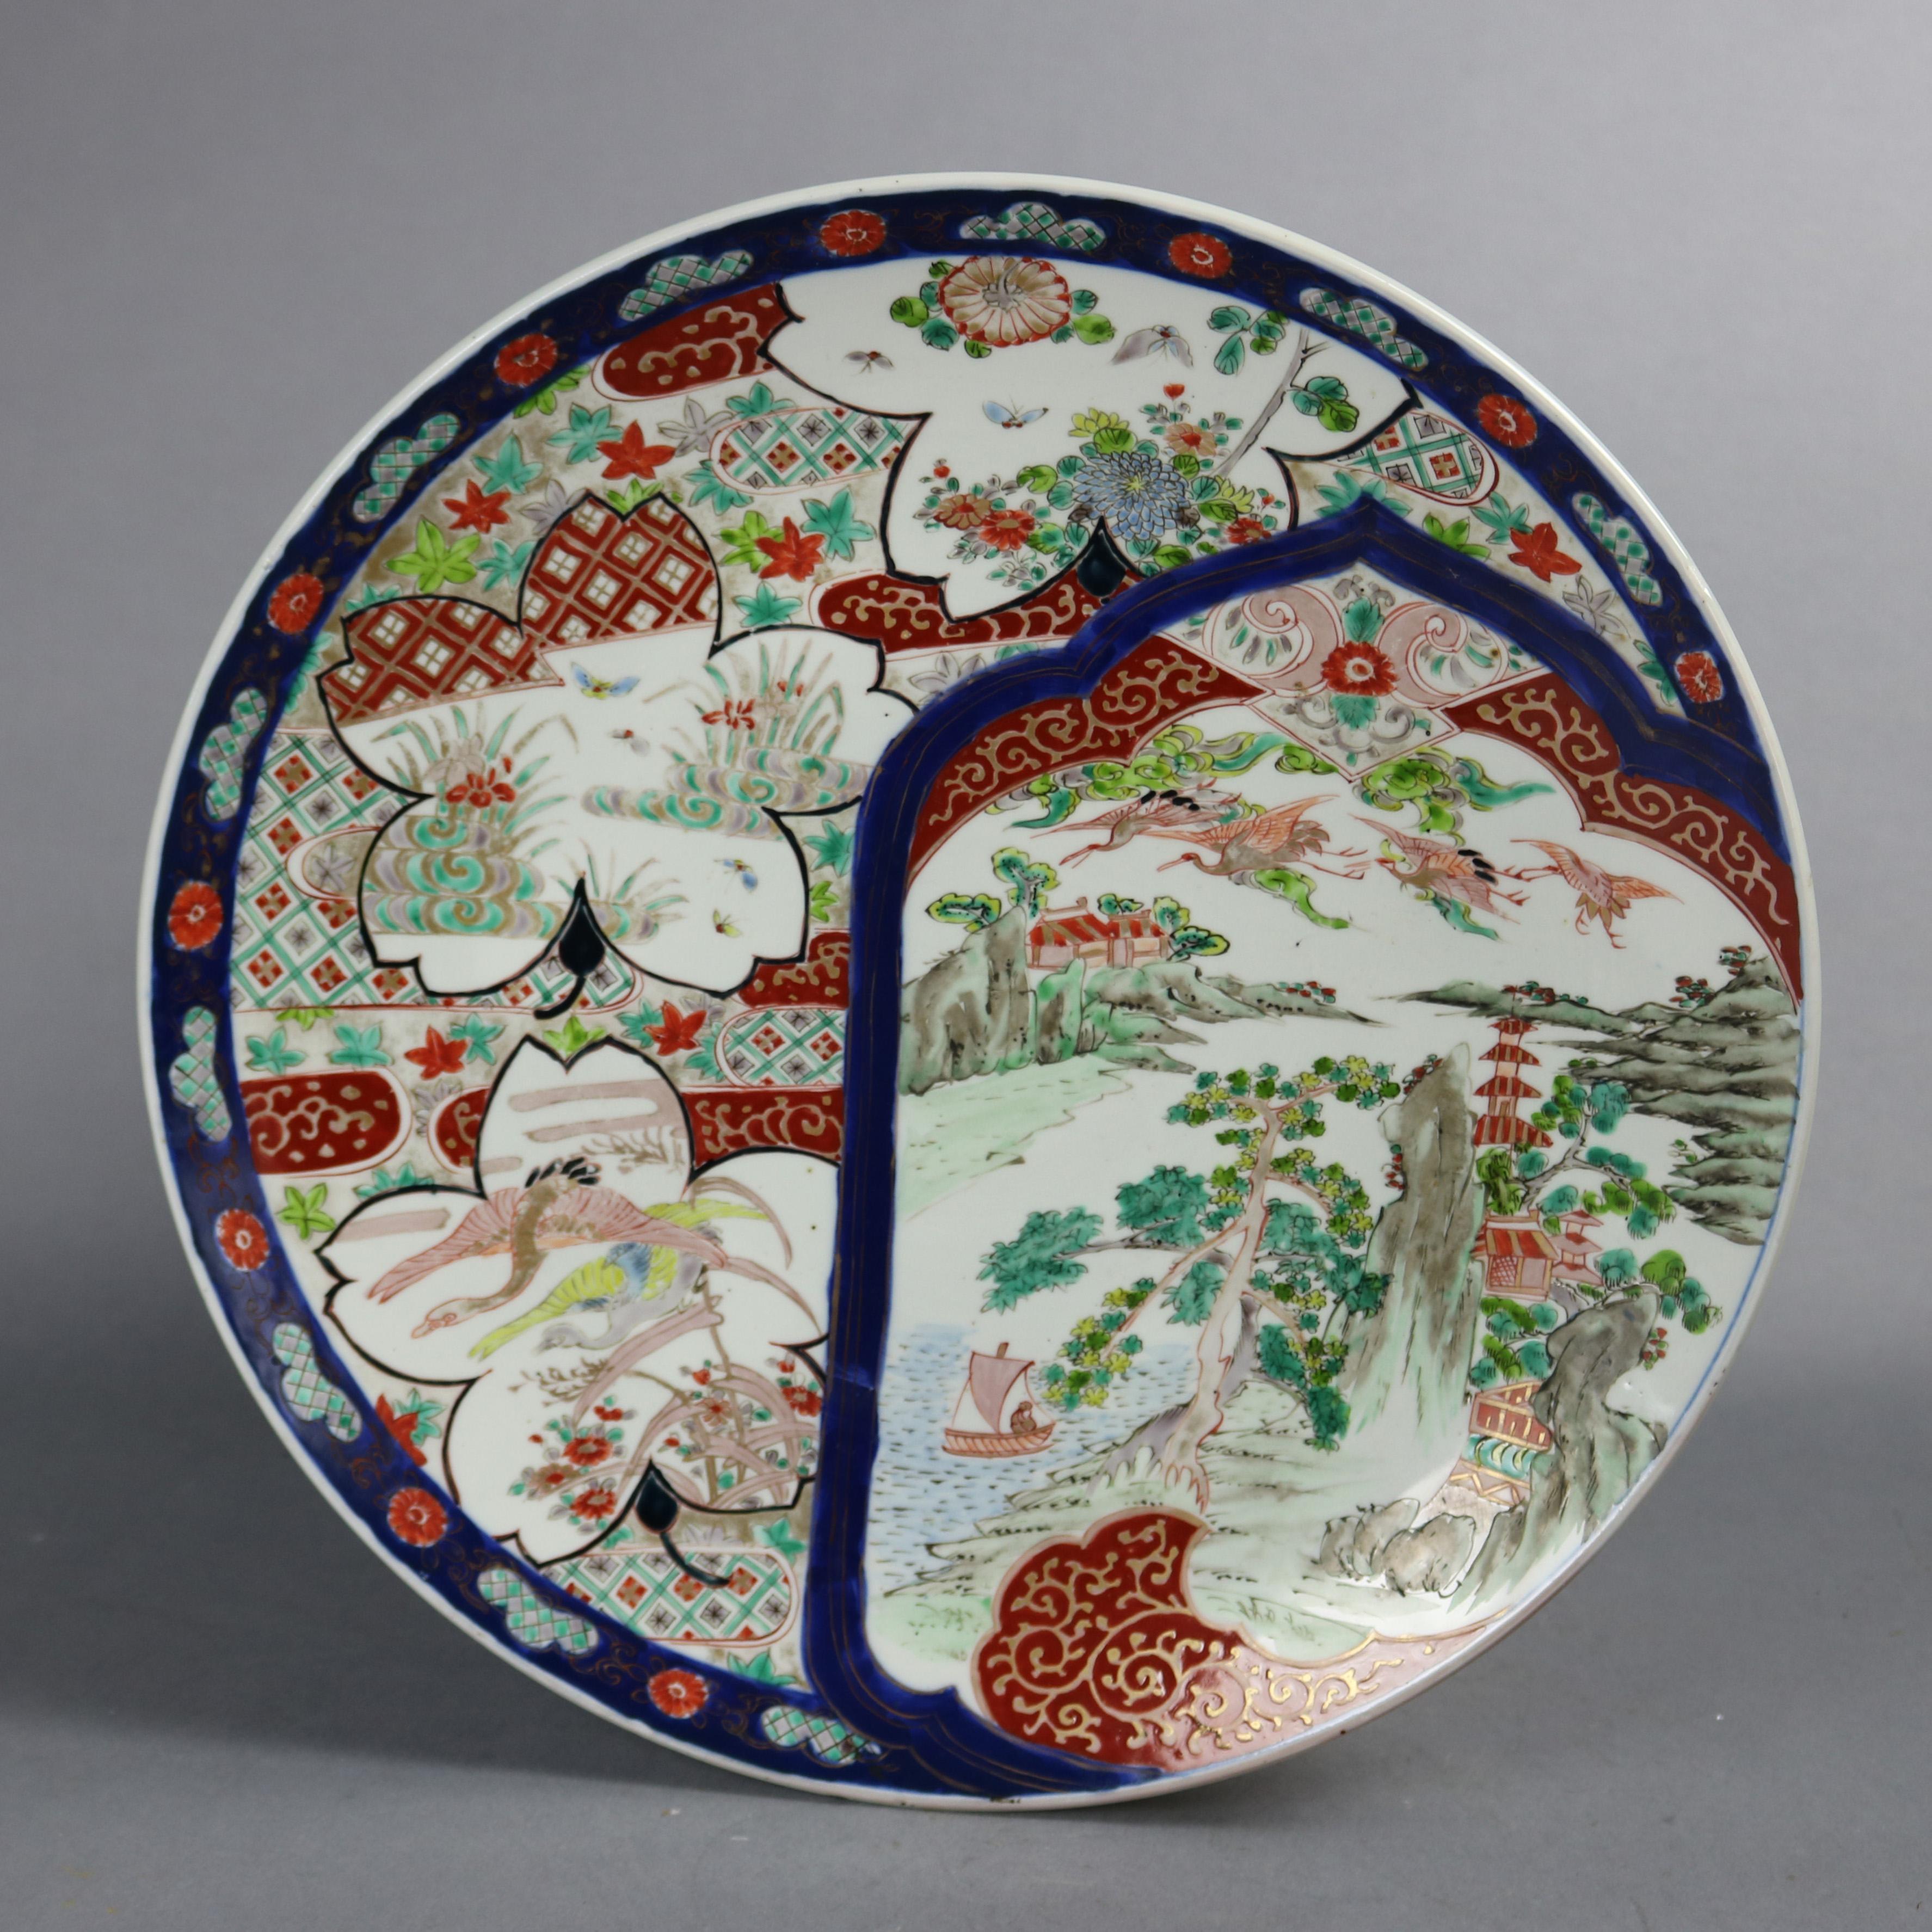 An antique Japanese Imari Porcelain charger offers floral form reserves having marsh scenes and pictorial countryside scene with pagoda, en veso with blue decoration, circa 1920

Measures: 1.75